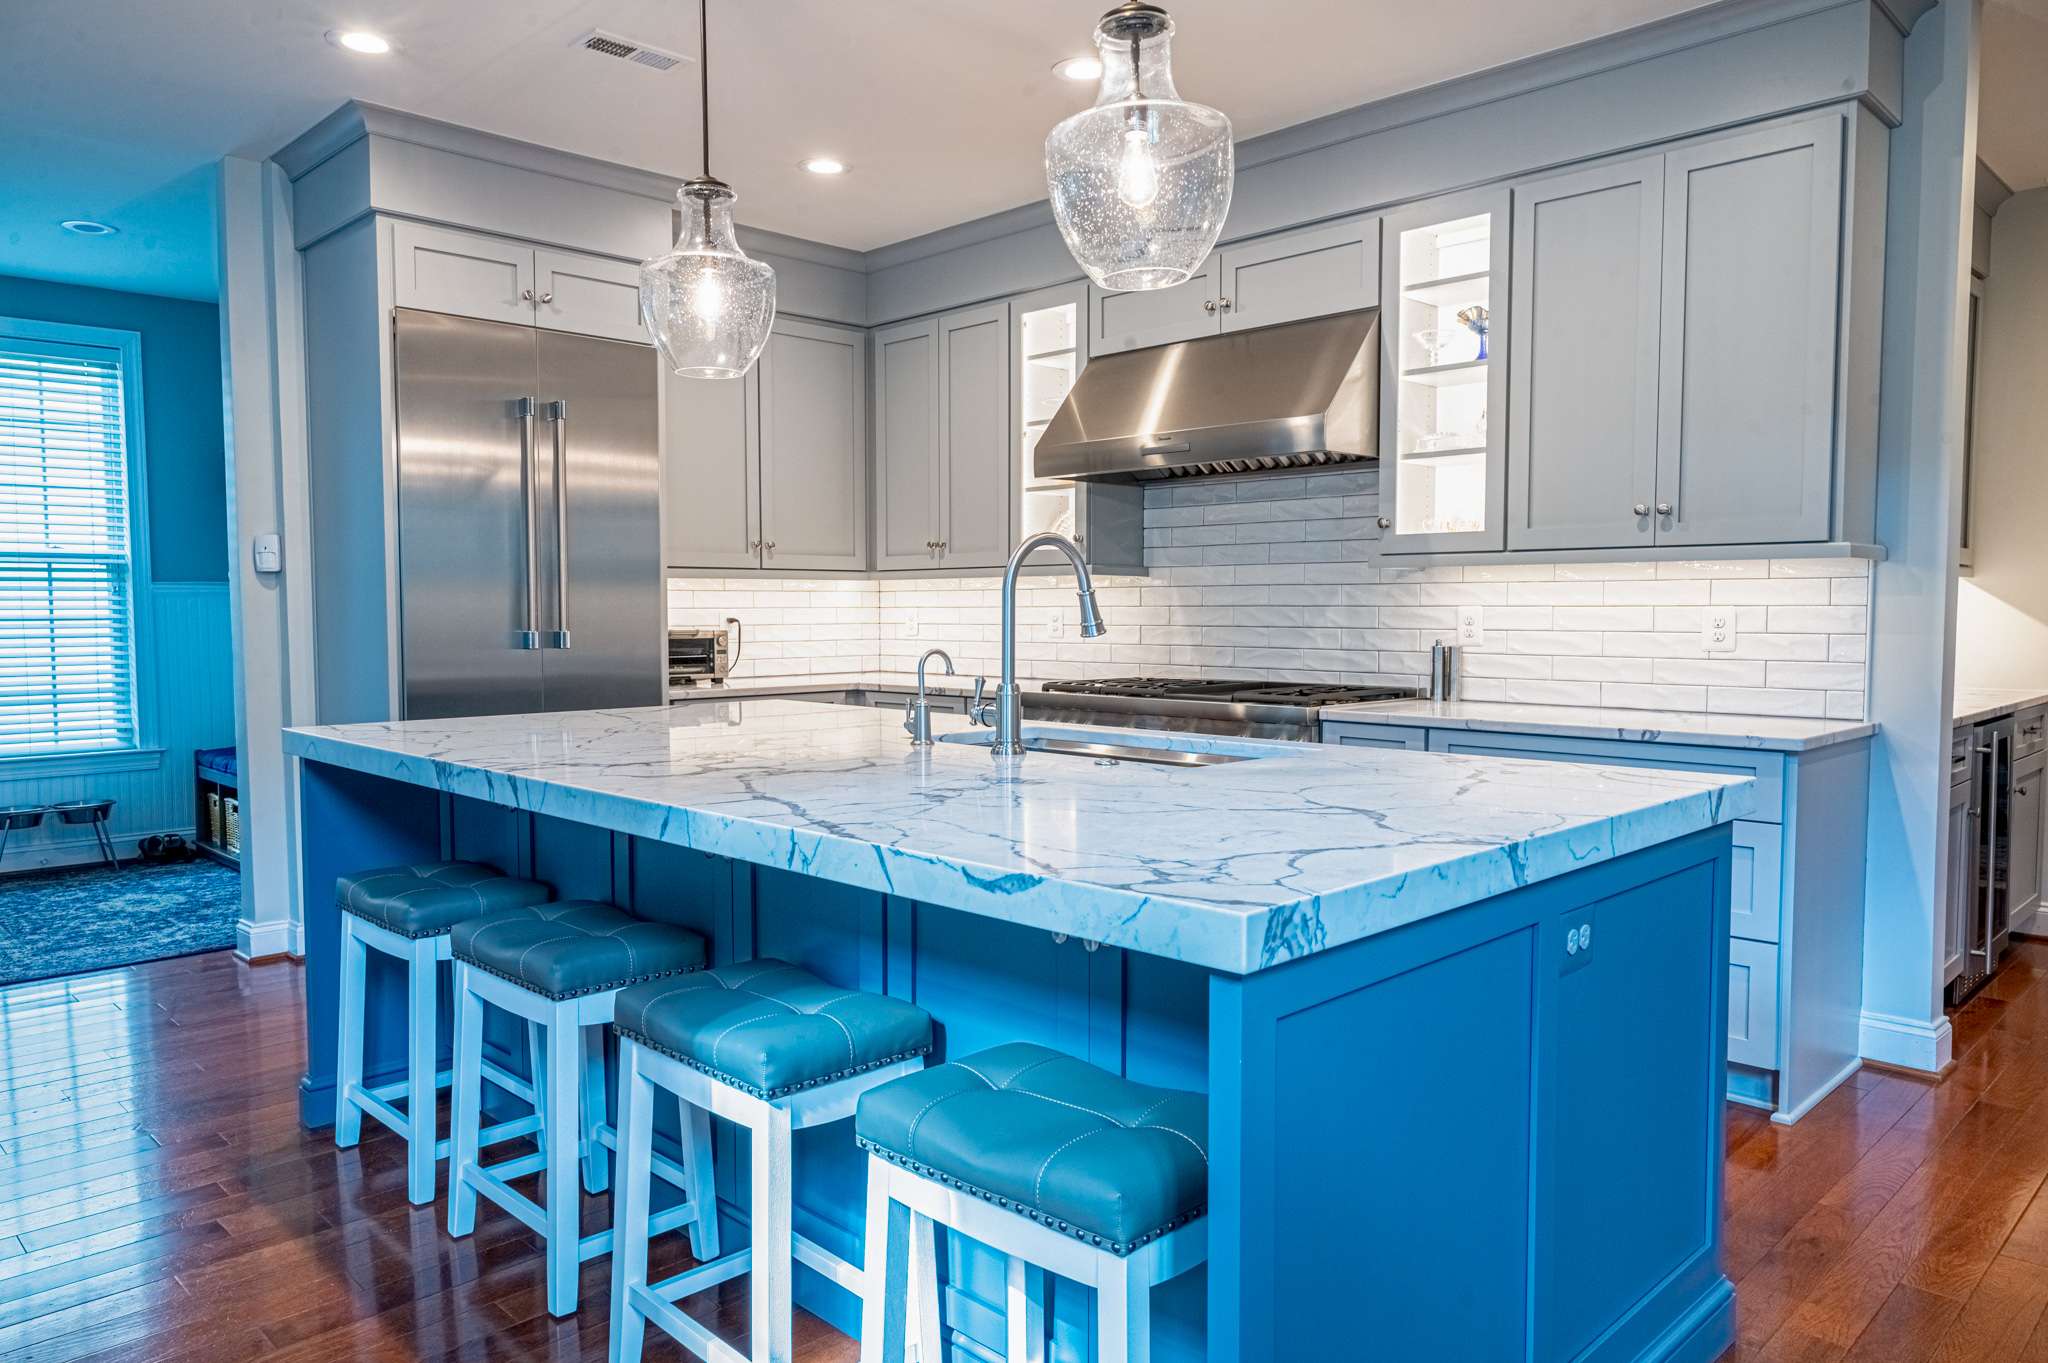 Before & After: A Beautifully Brighter Ashburn Kitchen Remodel